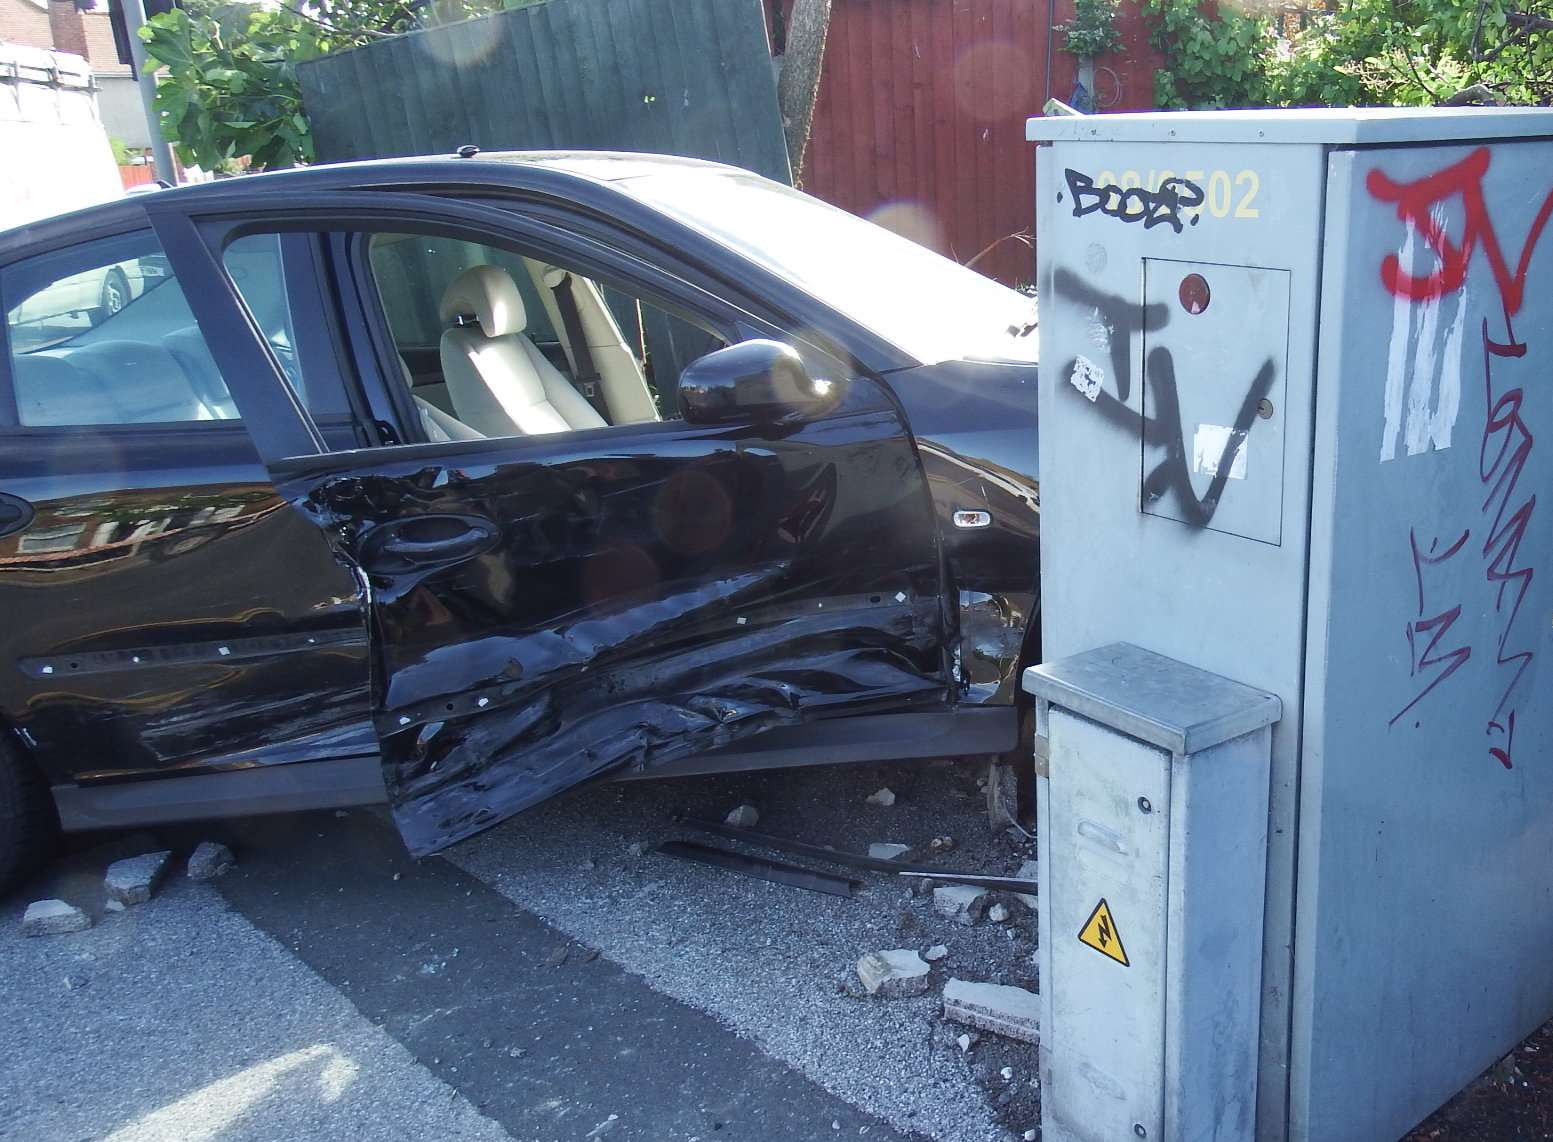 The vehicle narrowly avoided an electricity box. Picture: Mike Pett.